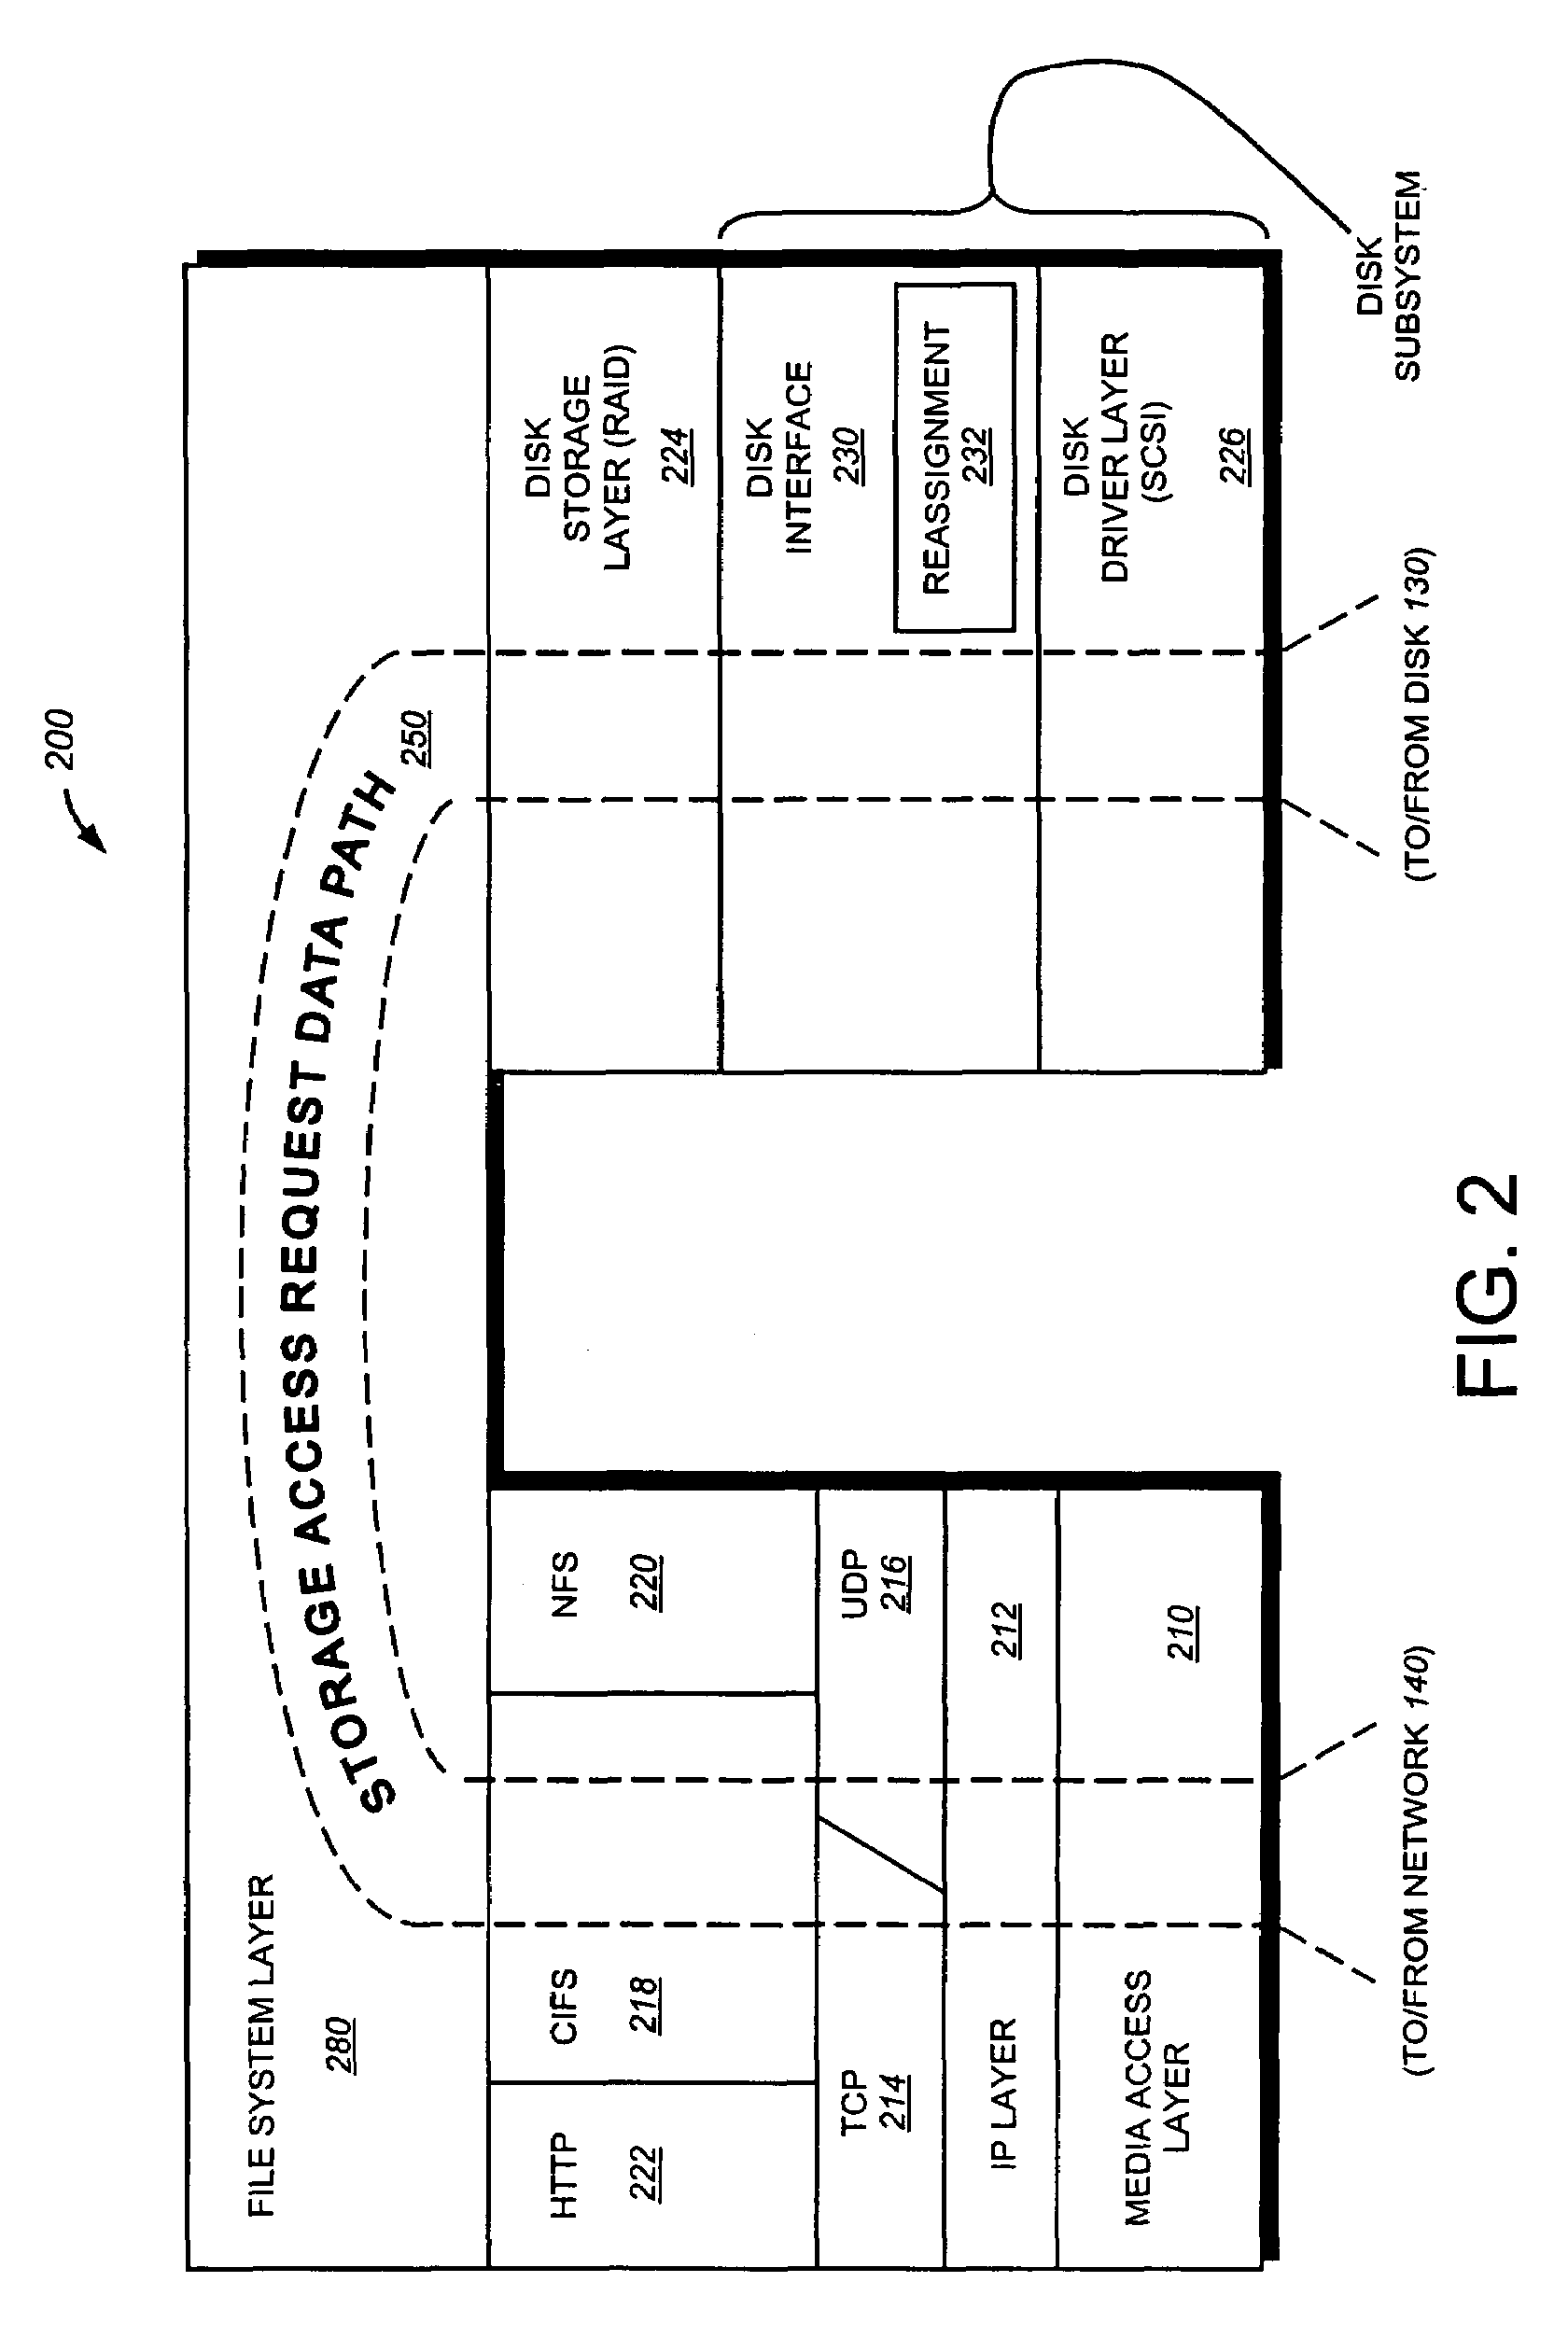 System and method for reducing unrecoverable media errors in a disk subsystem